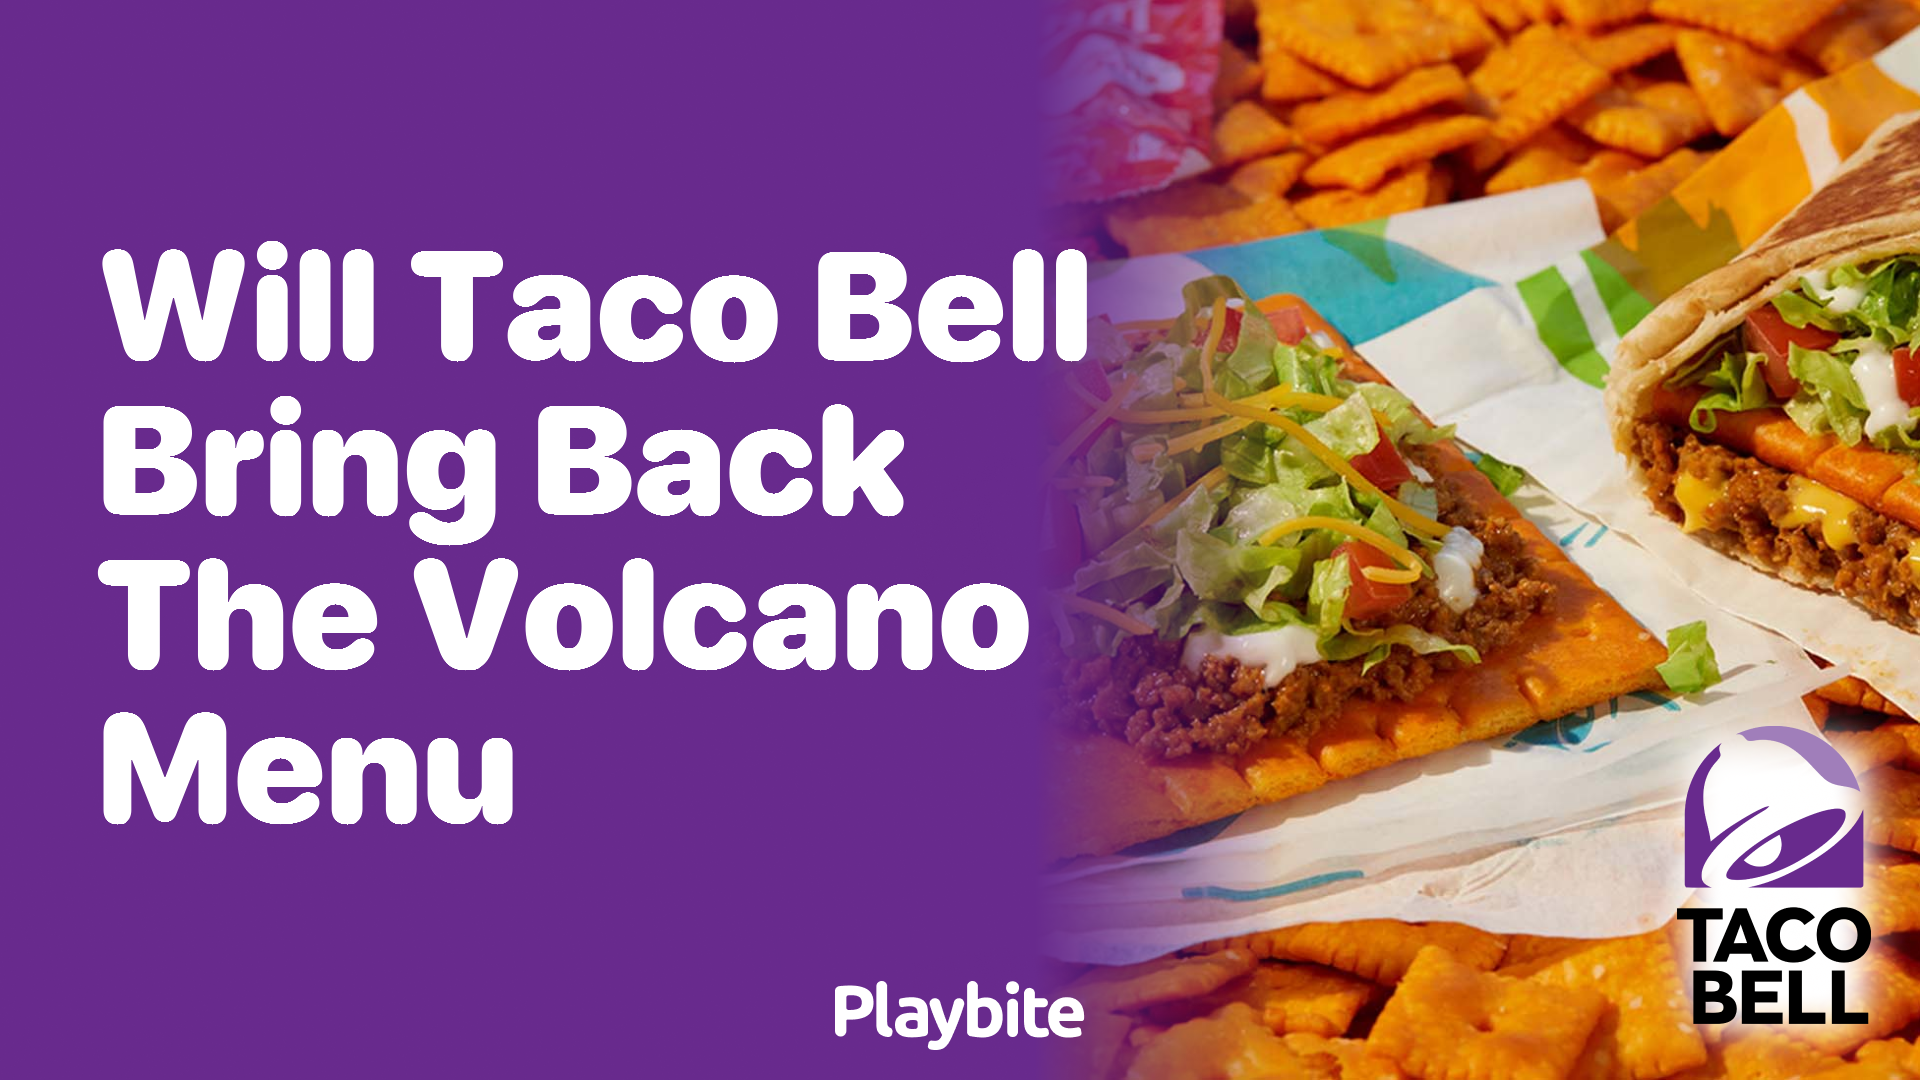 Will Taco Bell Bring Back the Volcano Menu? Let&#8217;s Find Out!